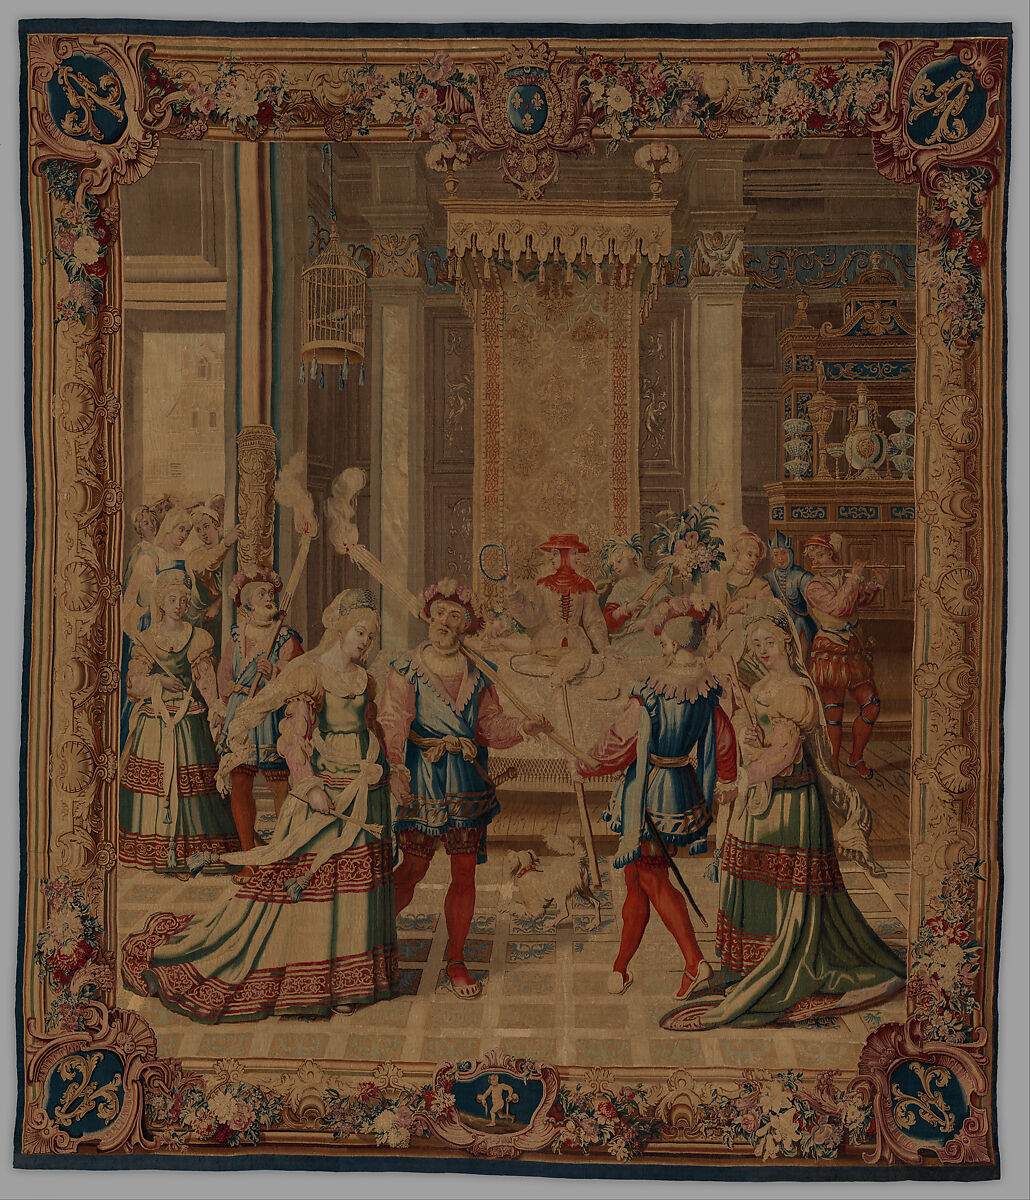 January from a set of The Months of Lucas, Master of the Months of Lucas (Netherlandish, active about 1535), Wool, silk (20-21 warps per inch, 8-9 per cm.), French, Paris 